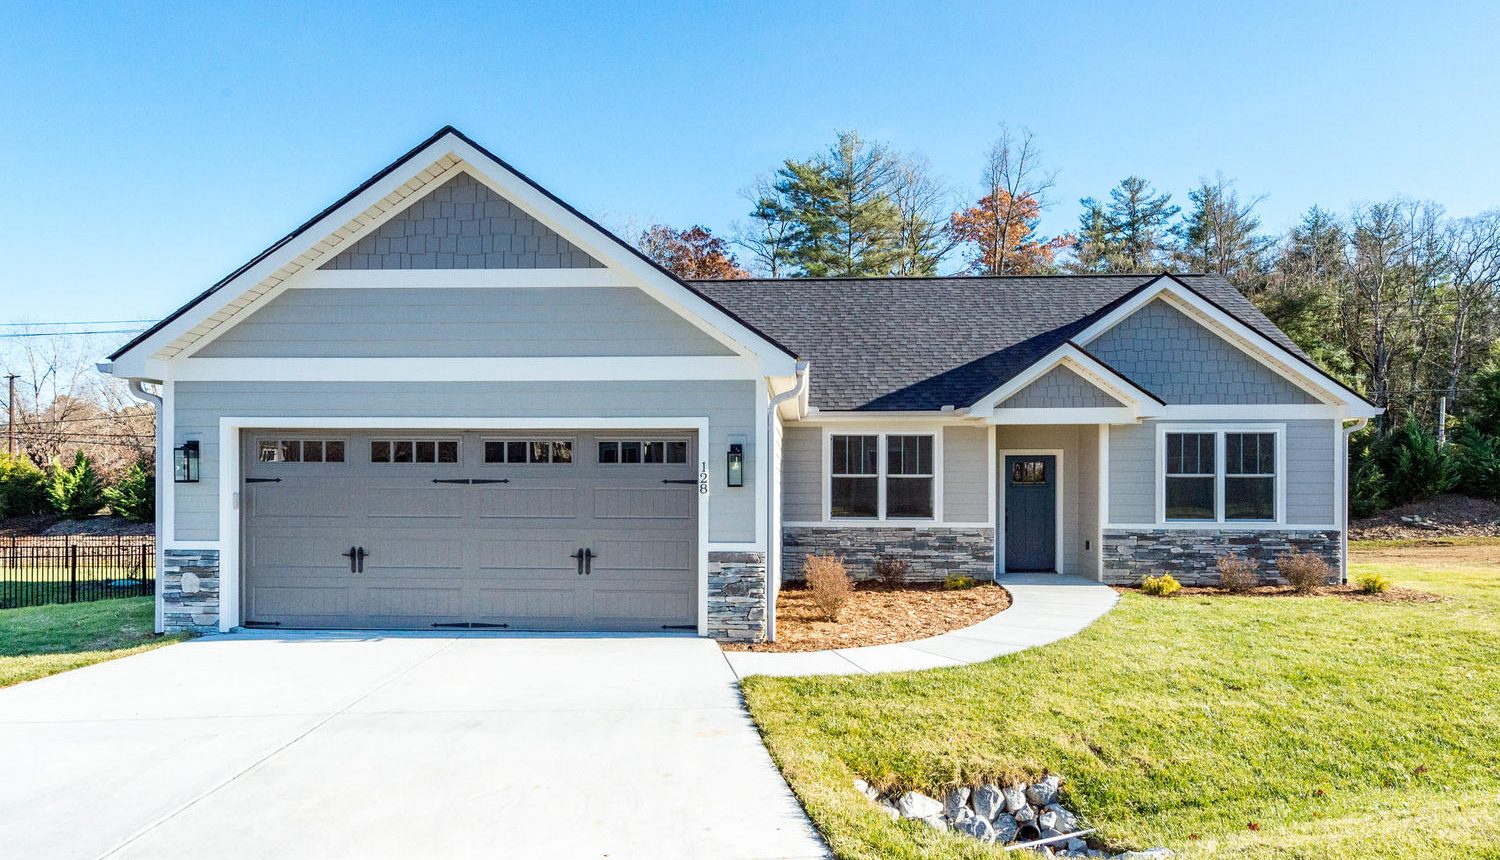 The Dogwood is a one-story custom home floorplan design with a specious garage and plenty of room for the family in Western North Carolina.